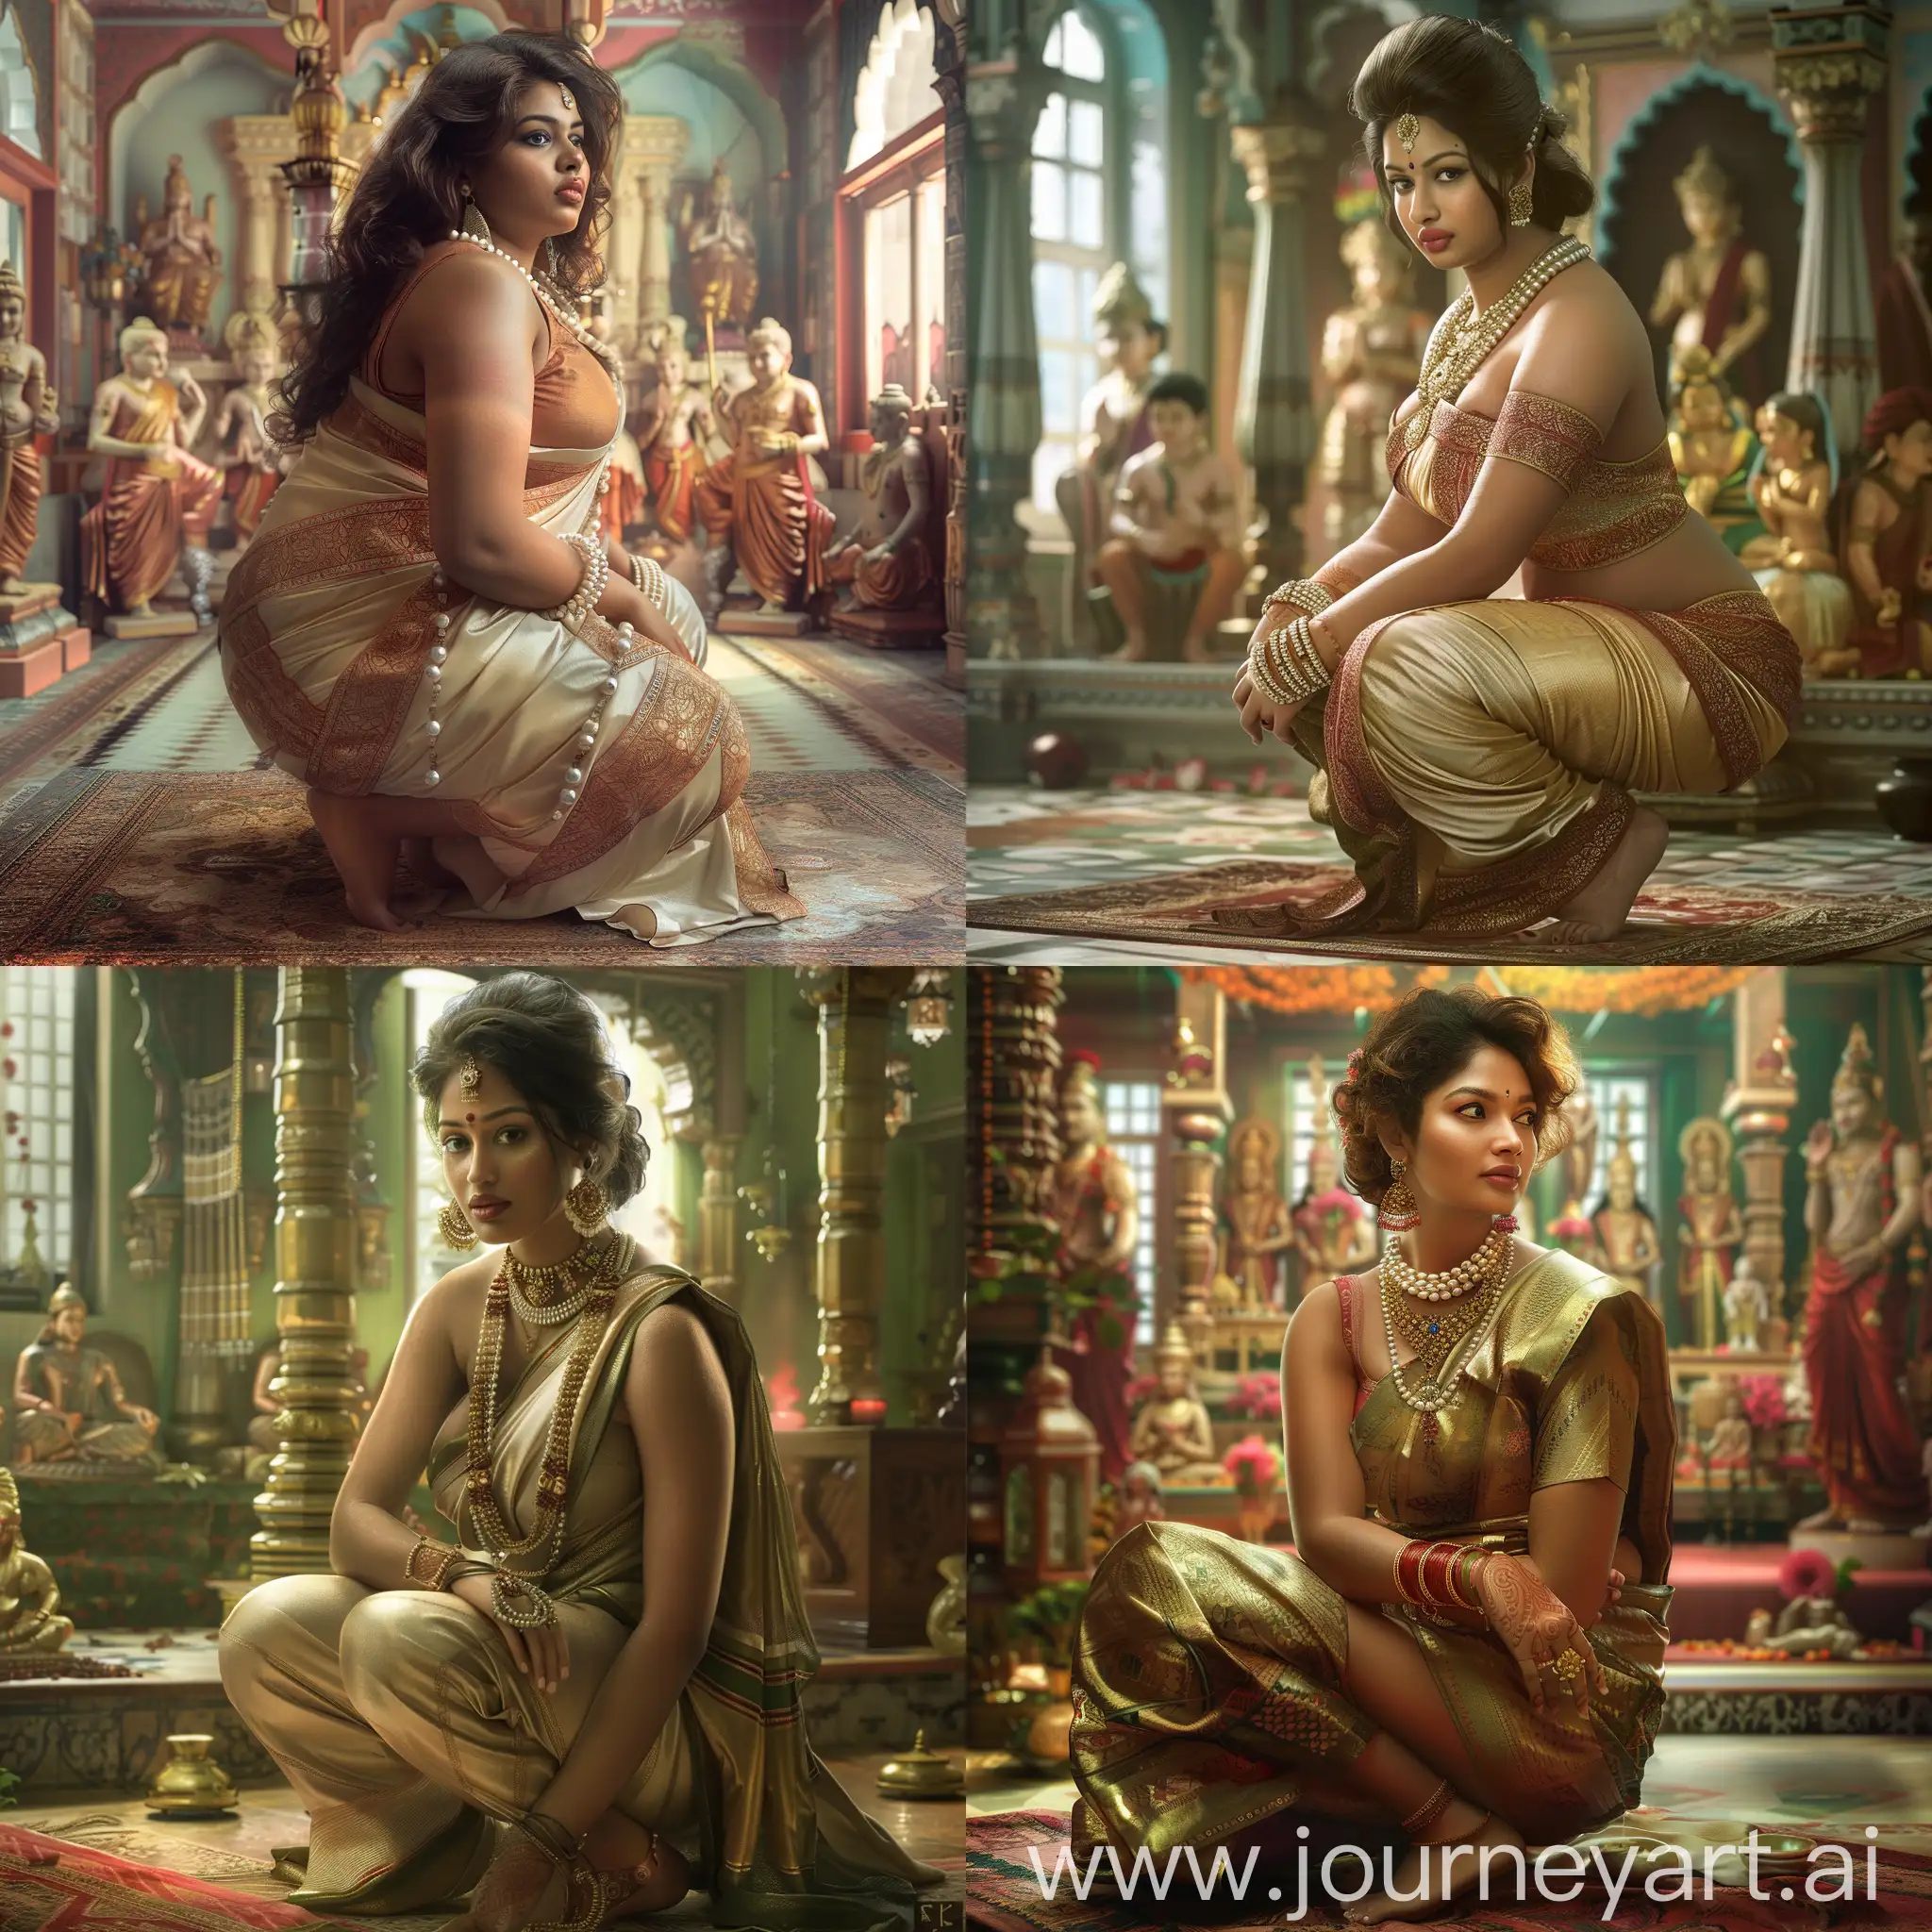 hyper realistic photorealistic visual of a very beautiful, curvy, clad in traditional saree, bangladeshi woman squatting, she wears a large pearl necklace chain, intricately detailed and picturesque lush home pooja hall where idols of Gods are decorated background, waist shot, half body shot